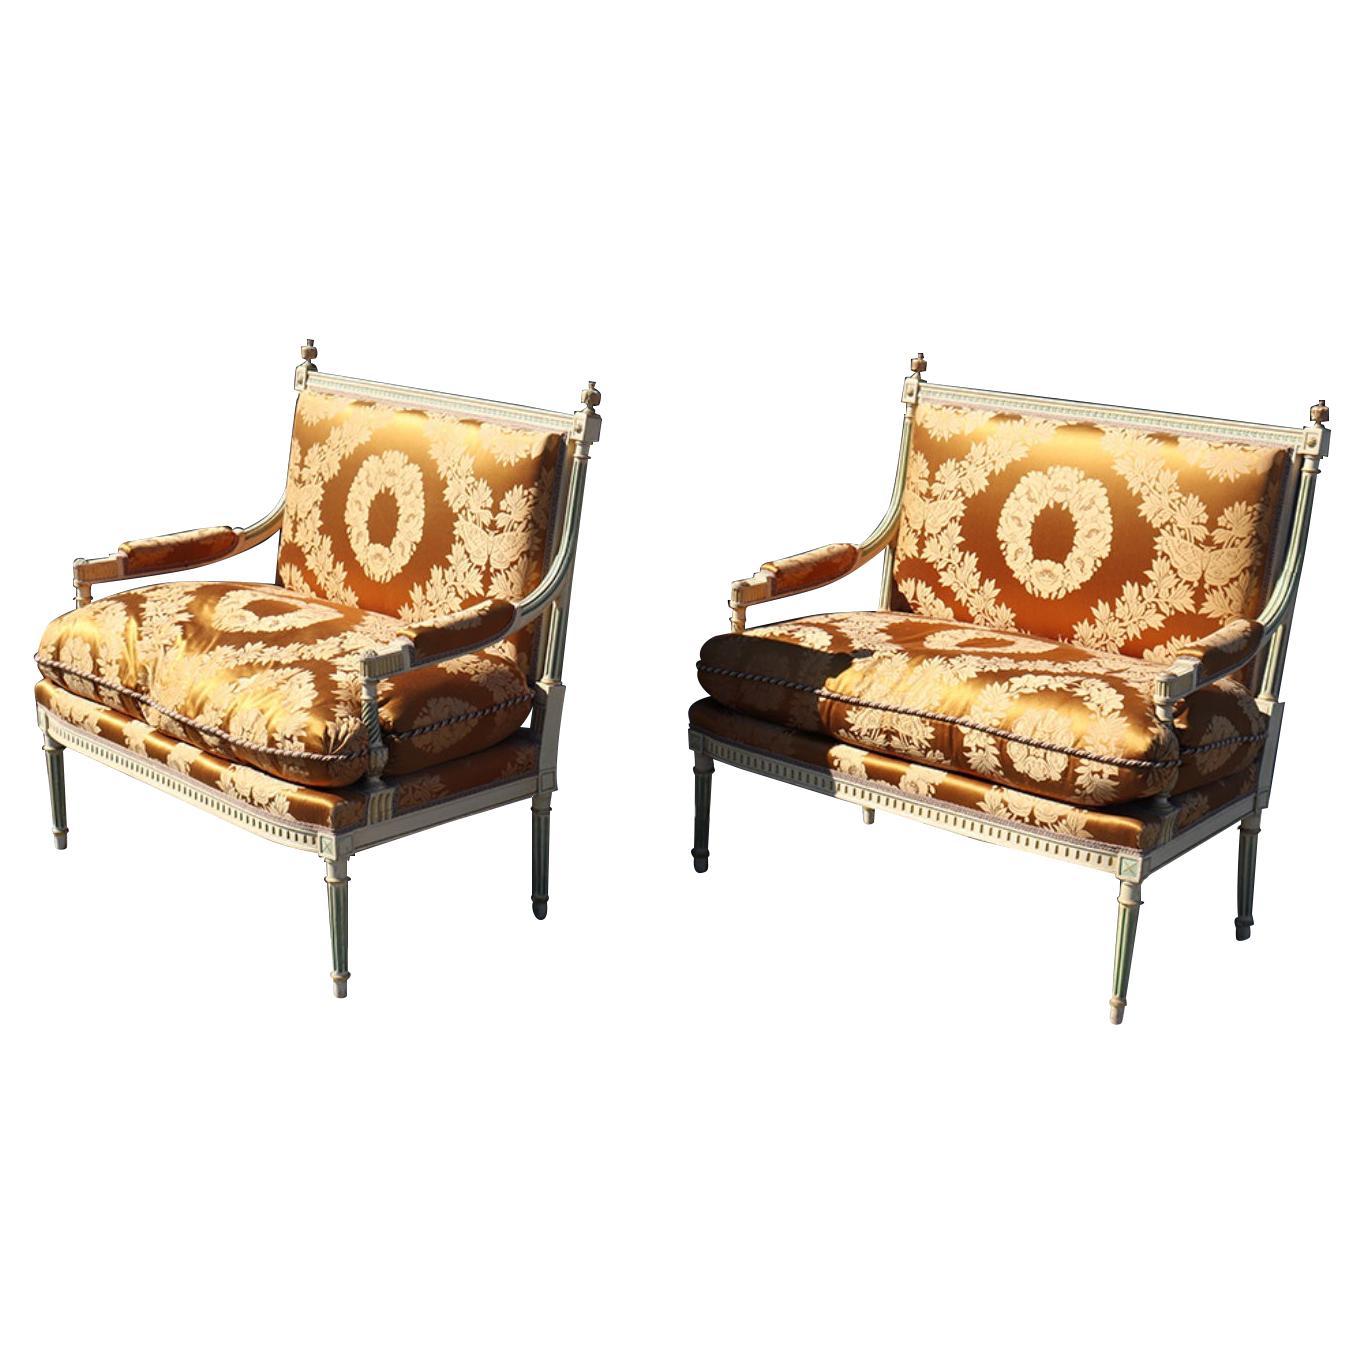 Pair of Signed Maison Jansen Paint Decorated Louis XVI Style Settees Sofas